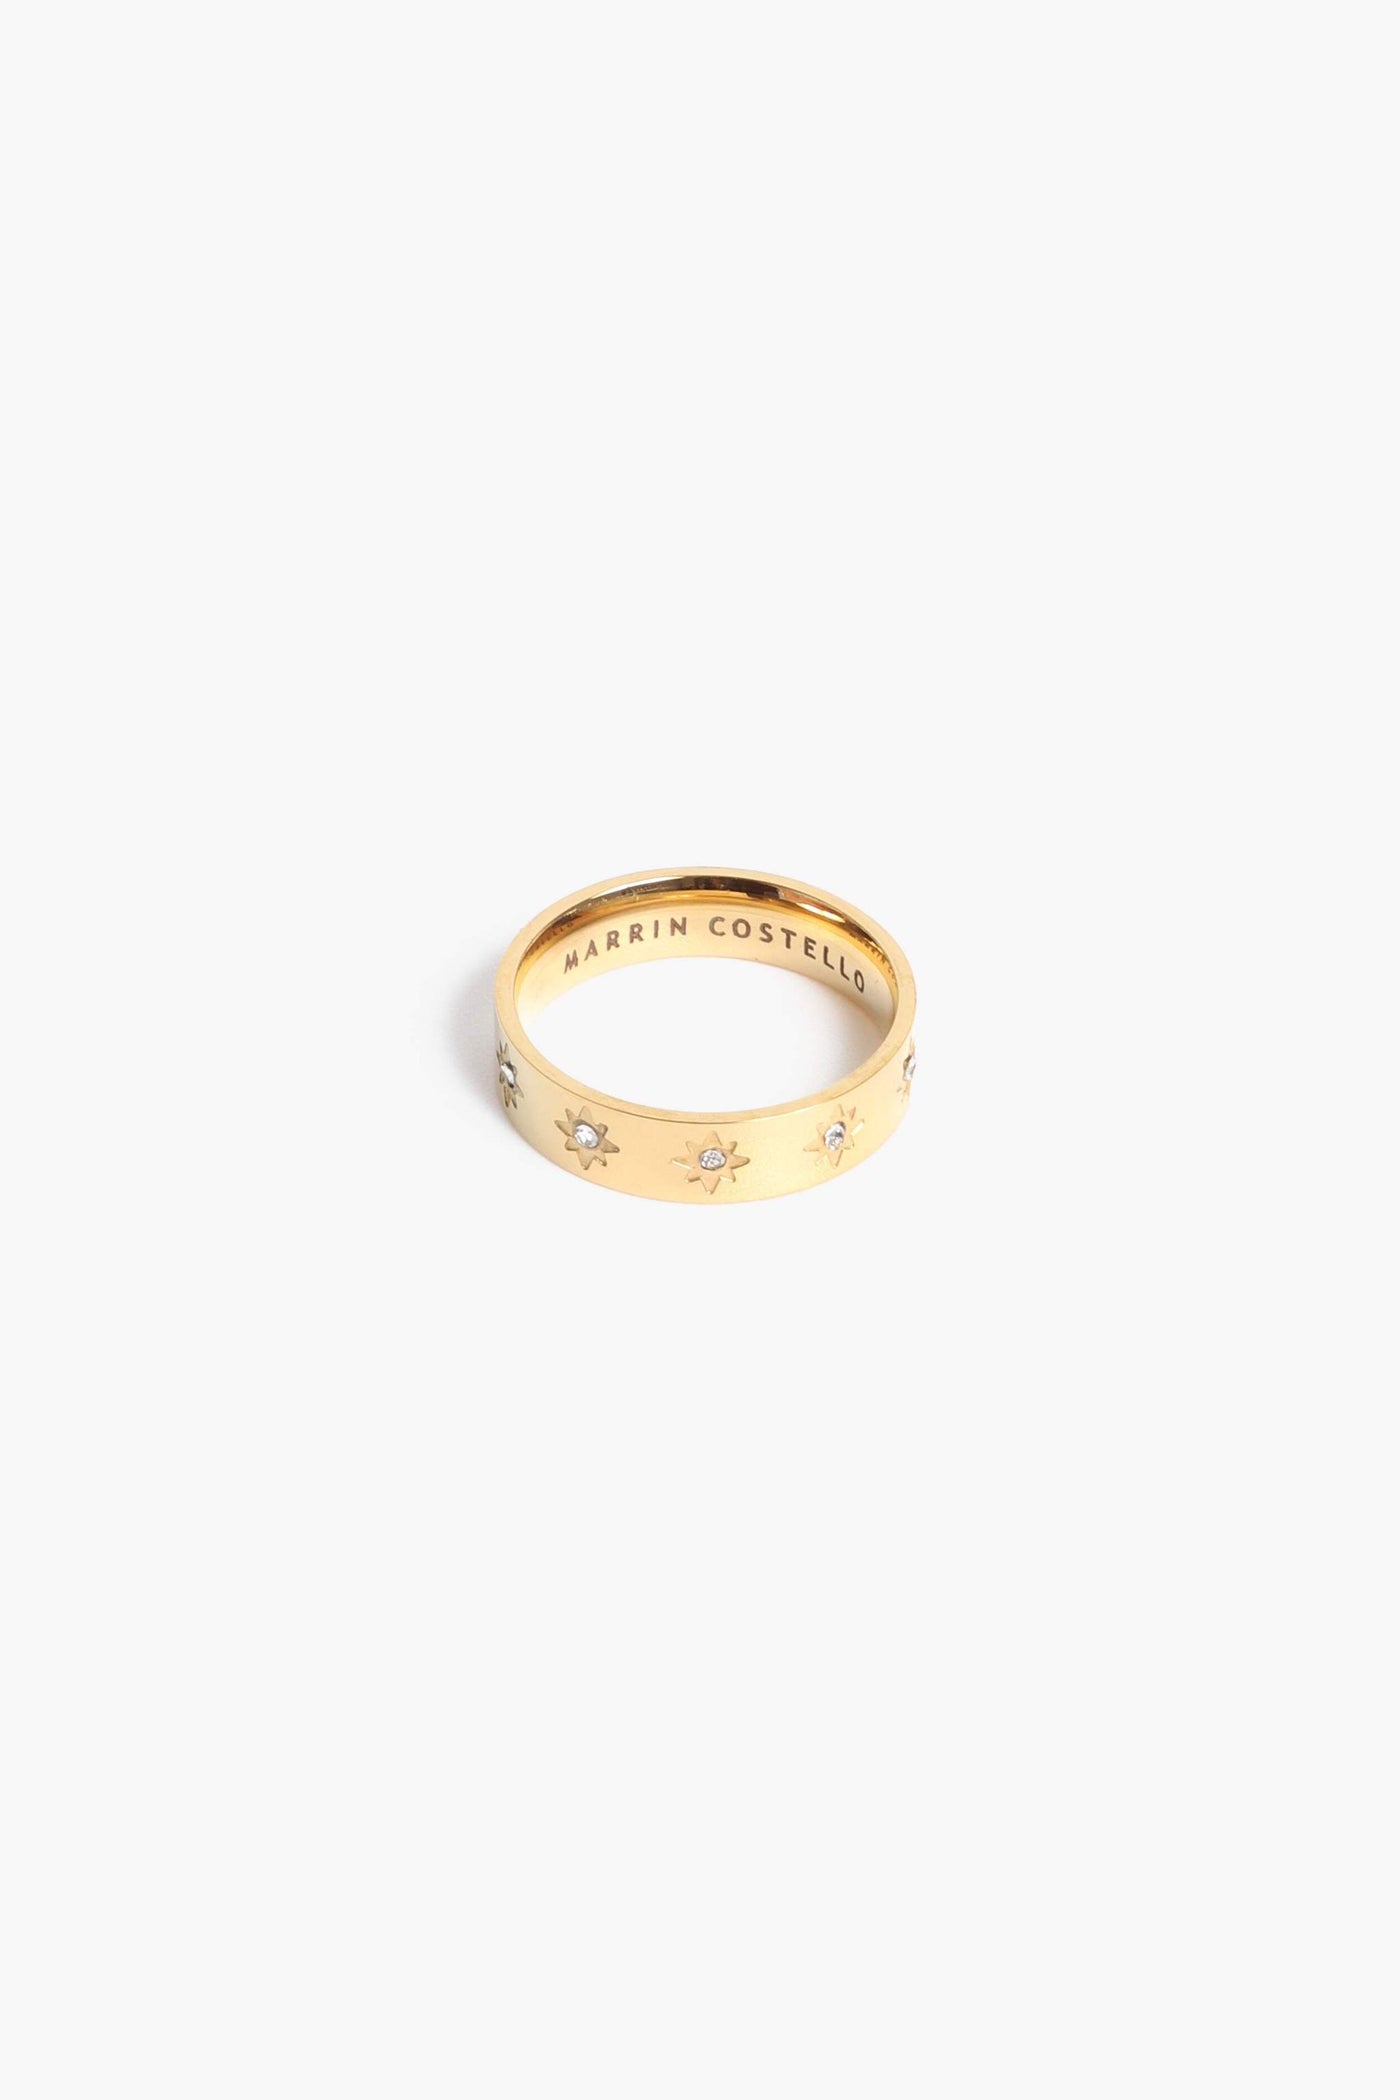 Marrin Costello Jewelry Orion Band star motif ring with CZ detail. Available in sizes 6, 7, 8. Waterproof, sustainable, hypoallergenic. 14k gold plated stainless steel.